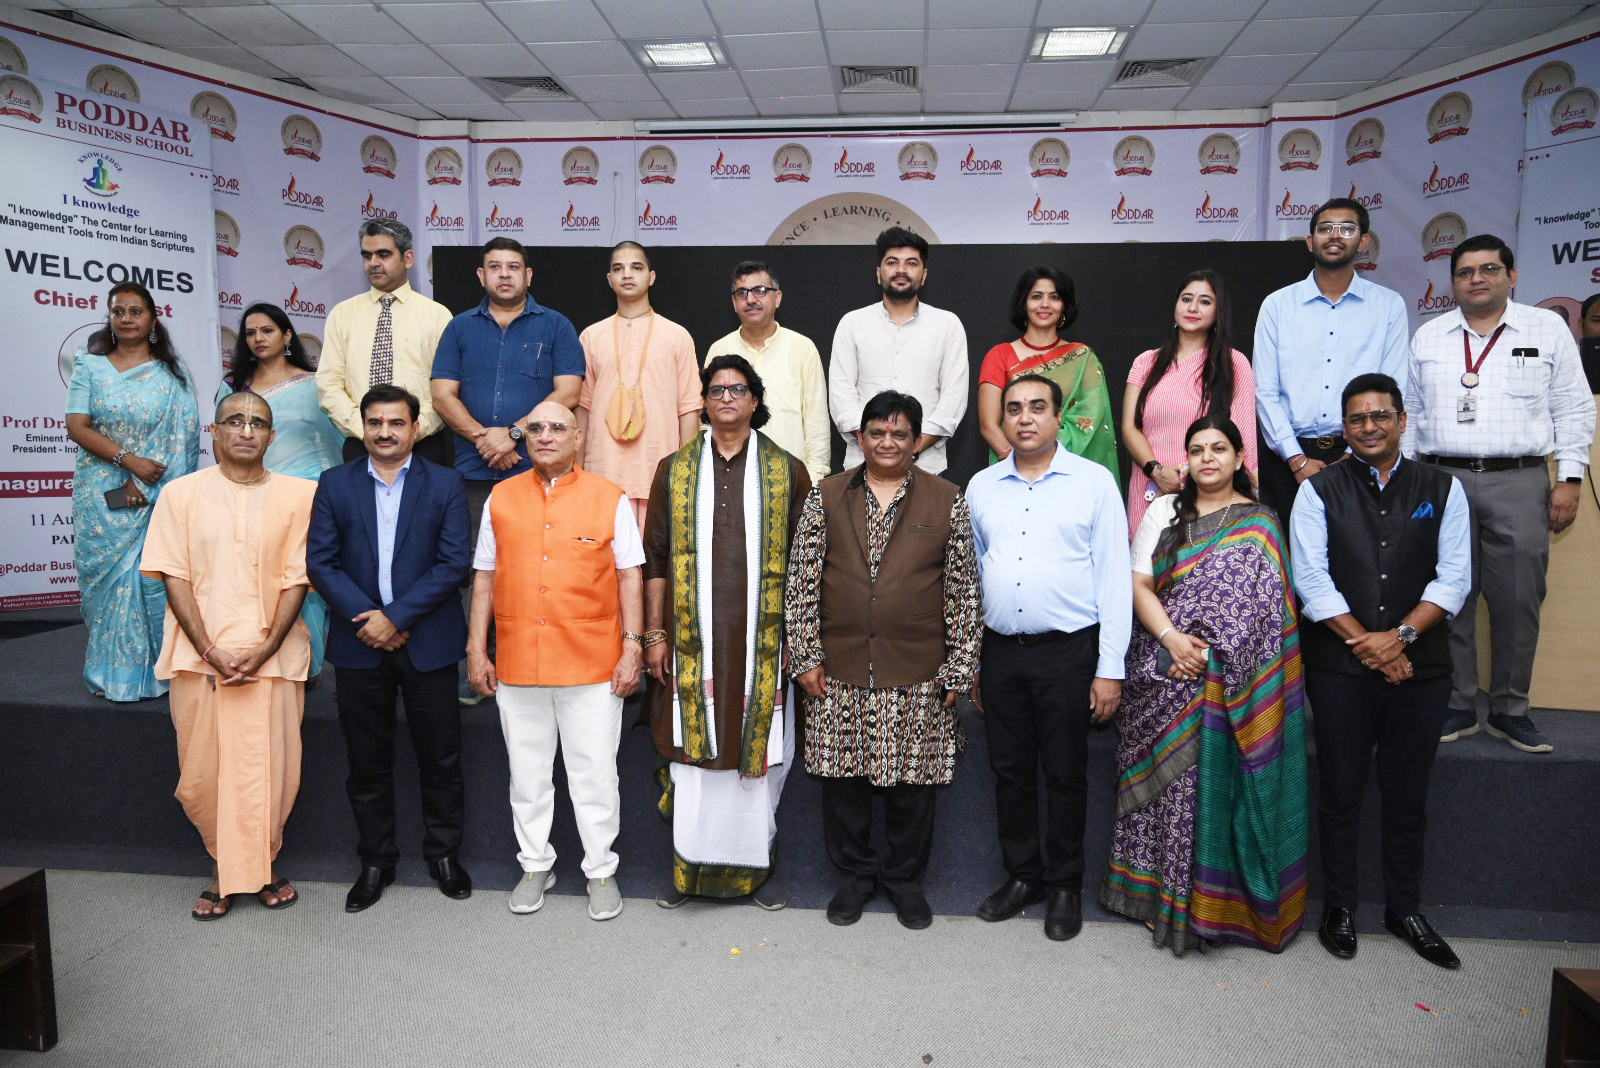 Poddar Group of Institutions inaugurated 'I-Knowledge - The Centre for Learning Manage Tools from Indian Scriptures